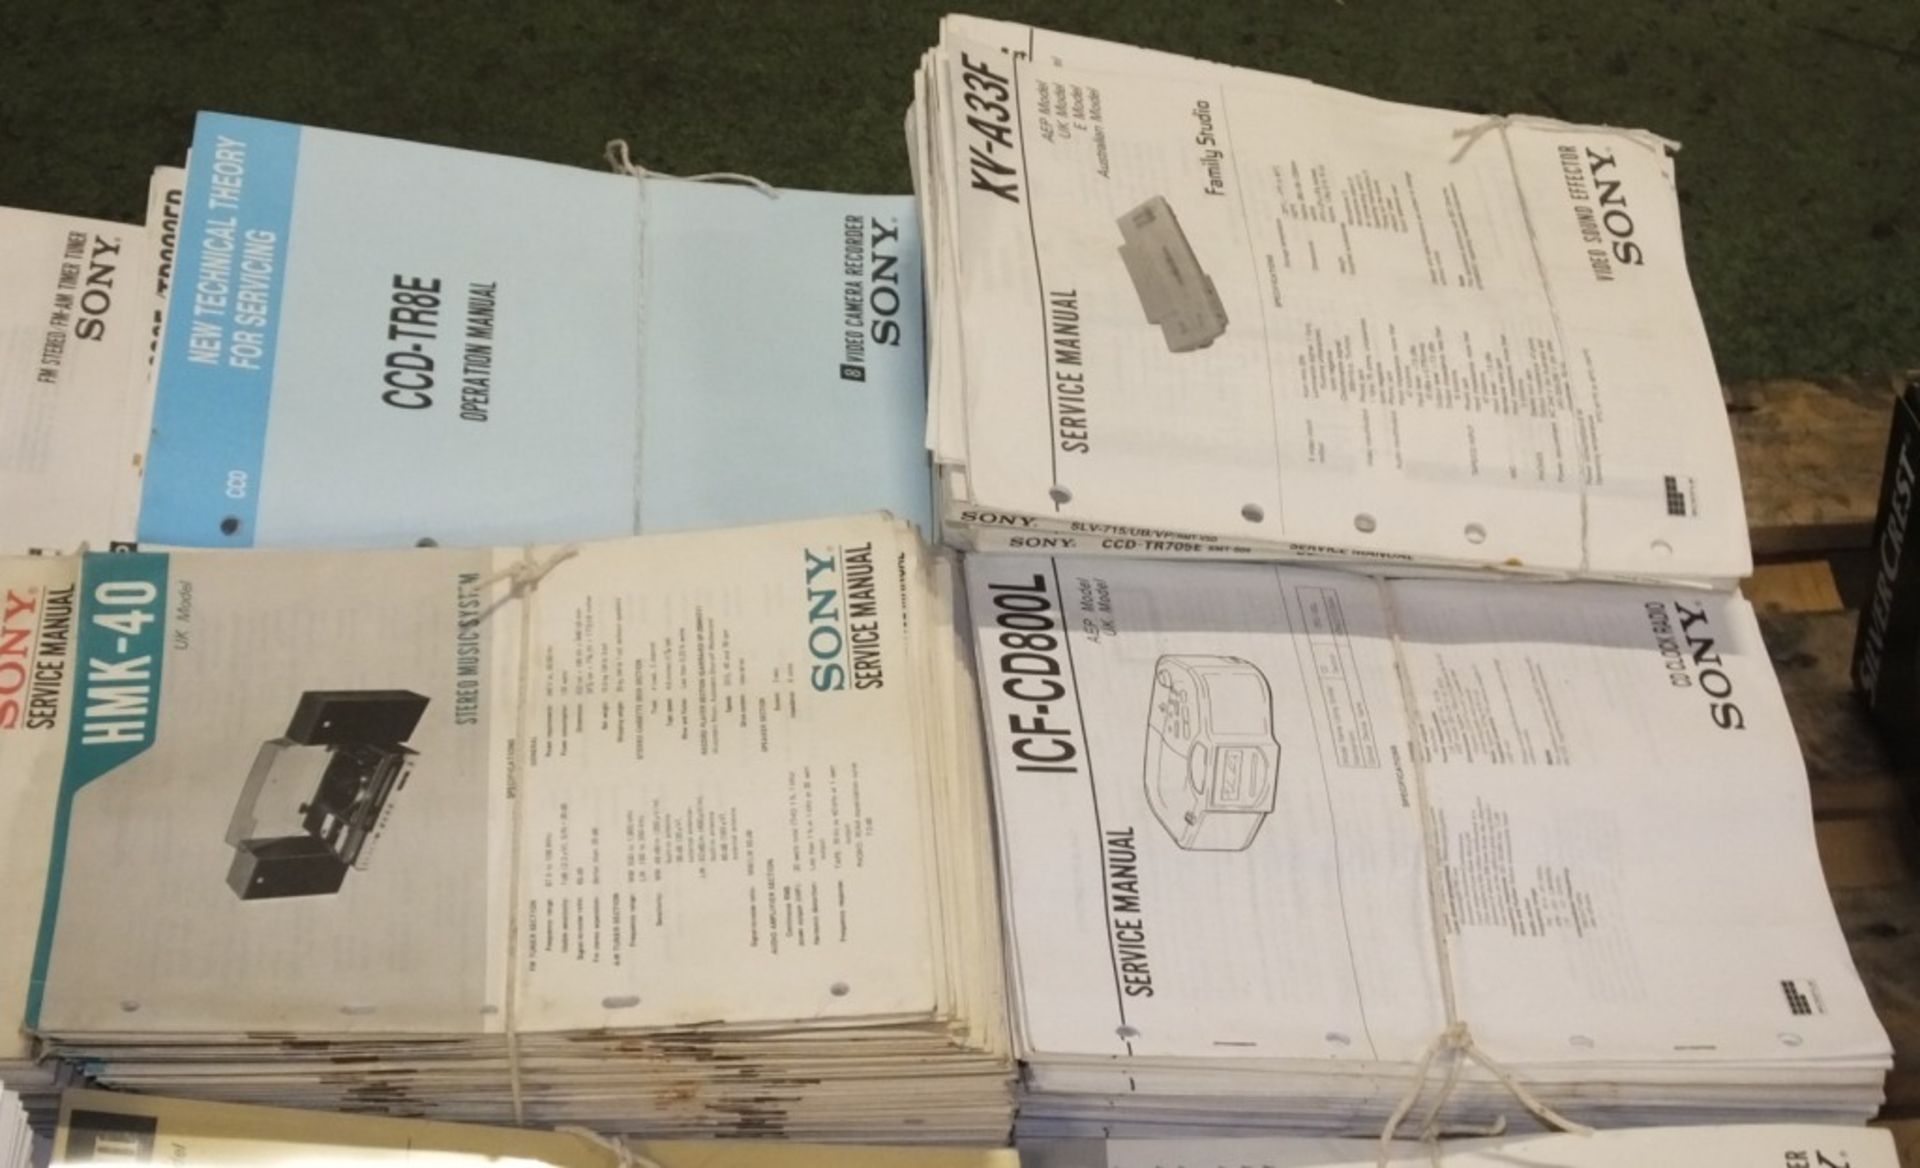 Sony Service Manuals 60s, 70s, 80s, 90s Audio Video TV Approx 2500 - Image 3 of 5